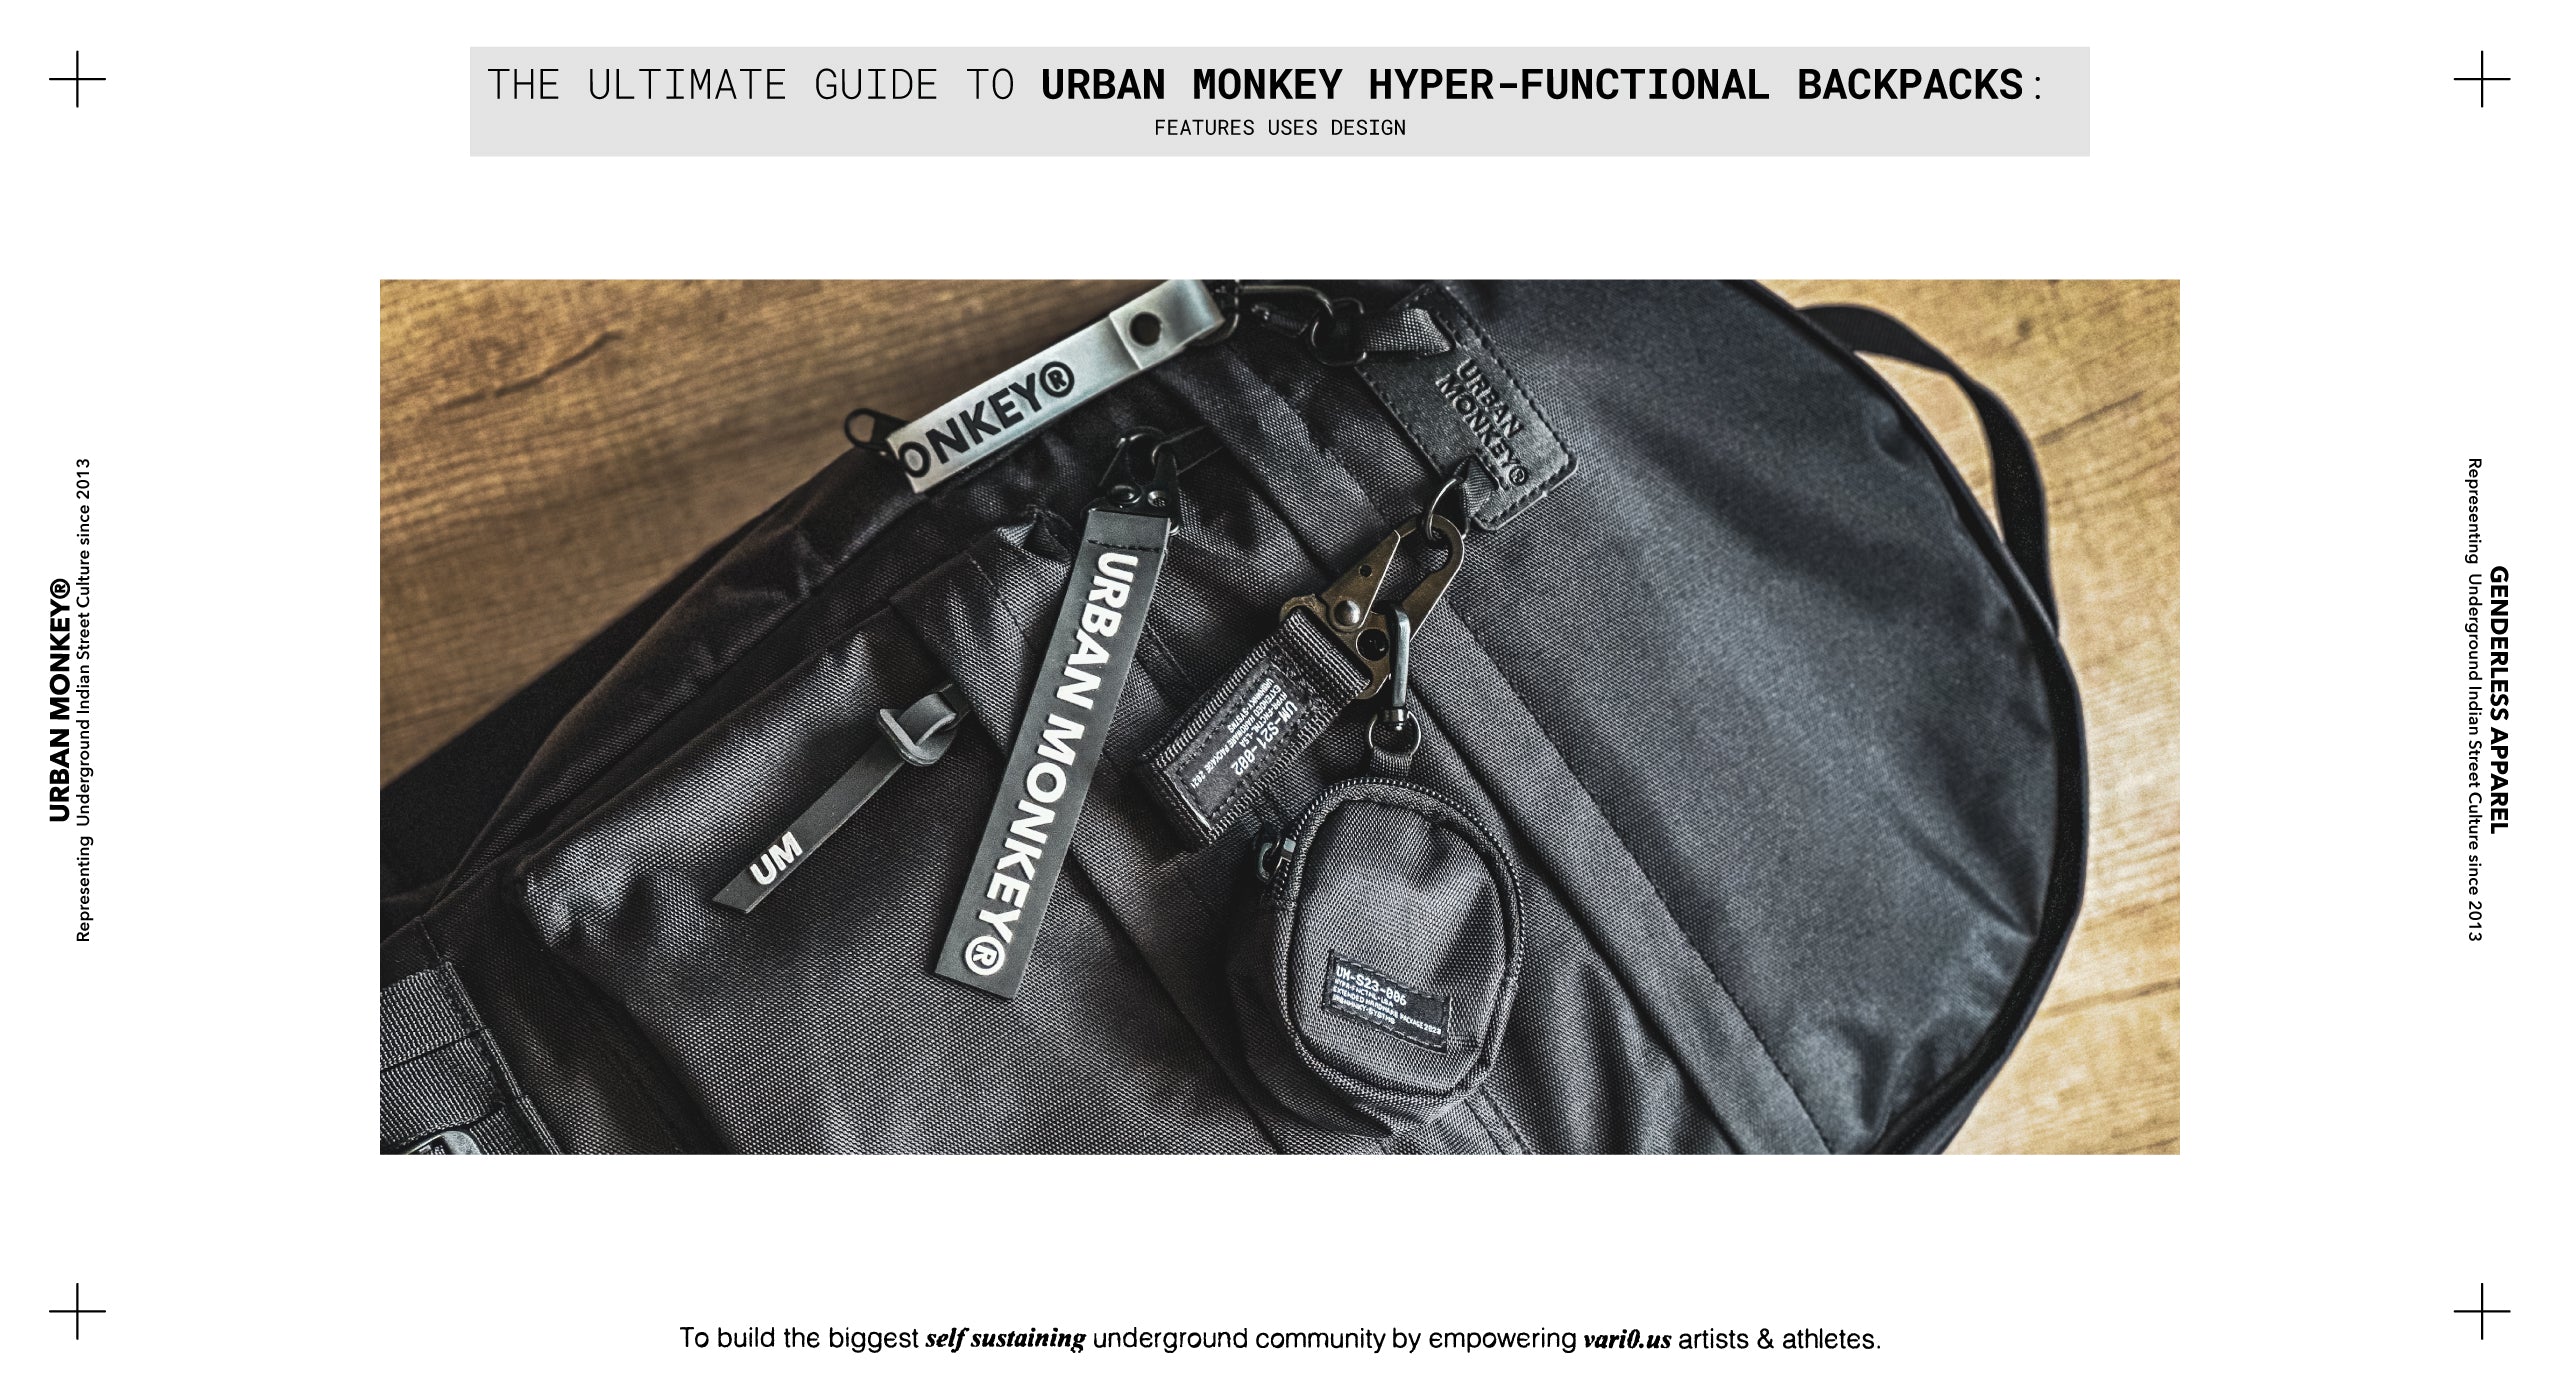 The Ultimate Guide to Urban Monkey Hyper-Functional Backpacks